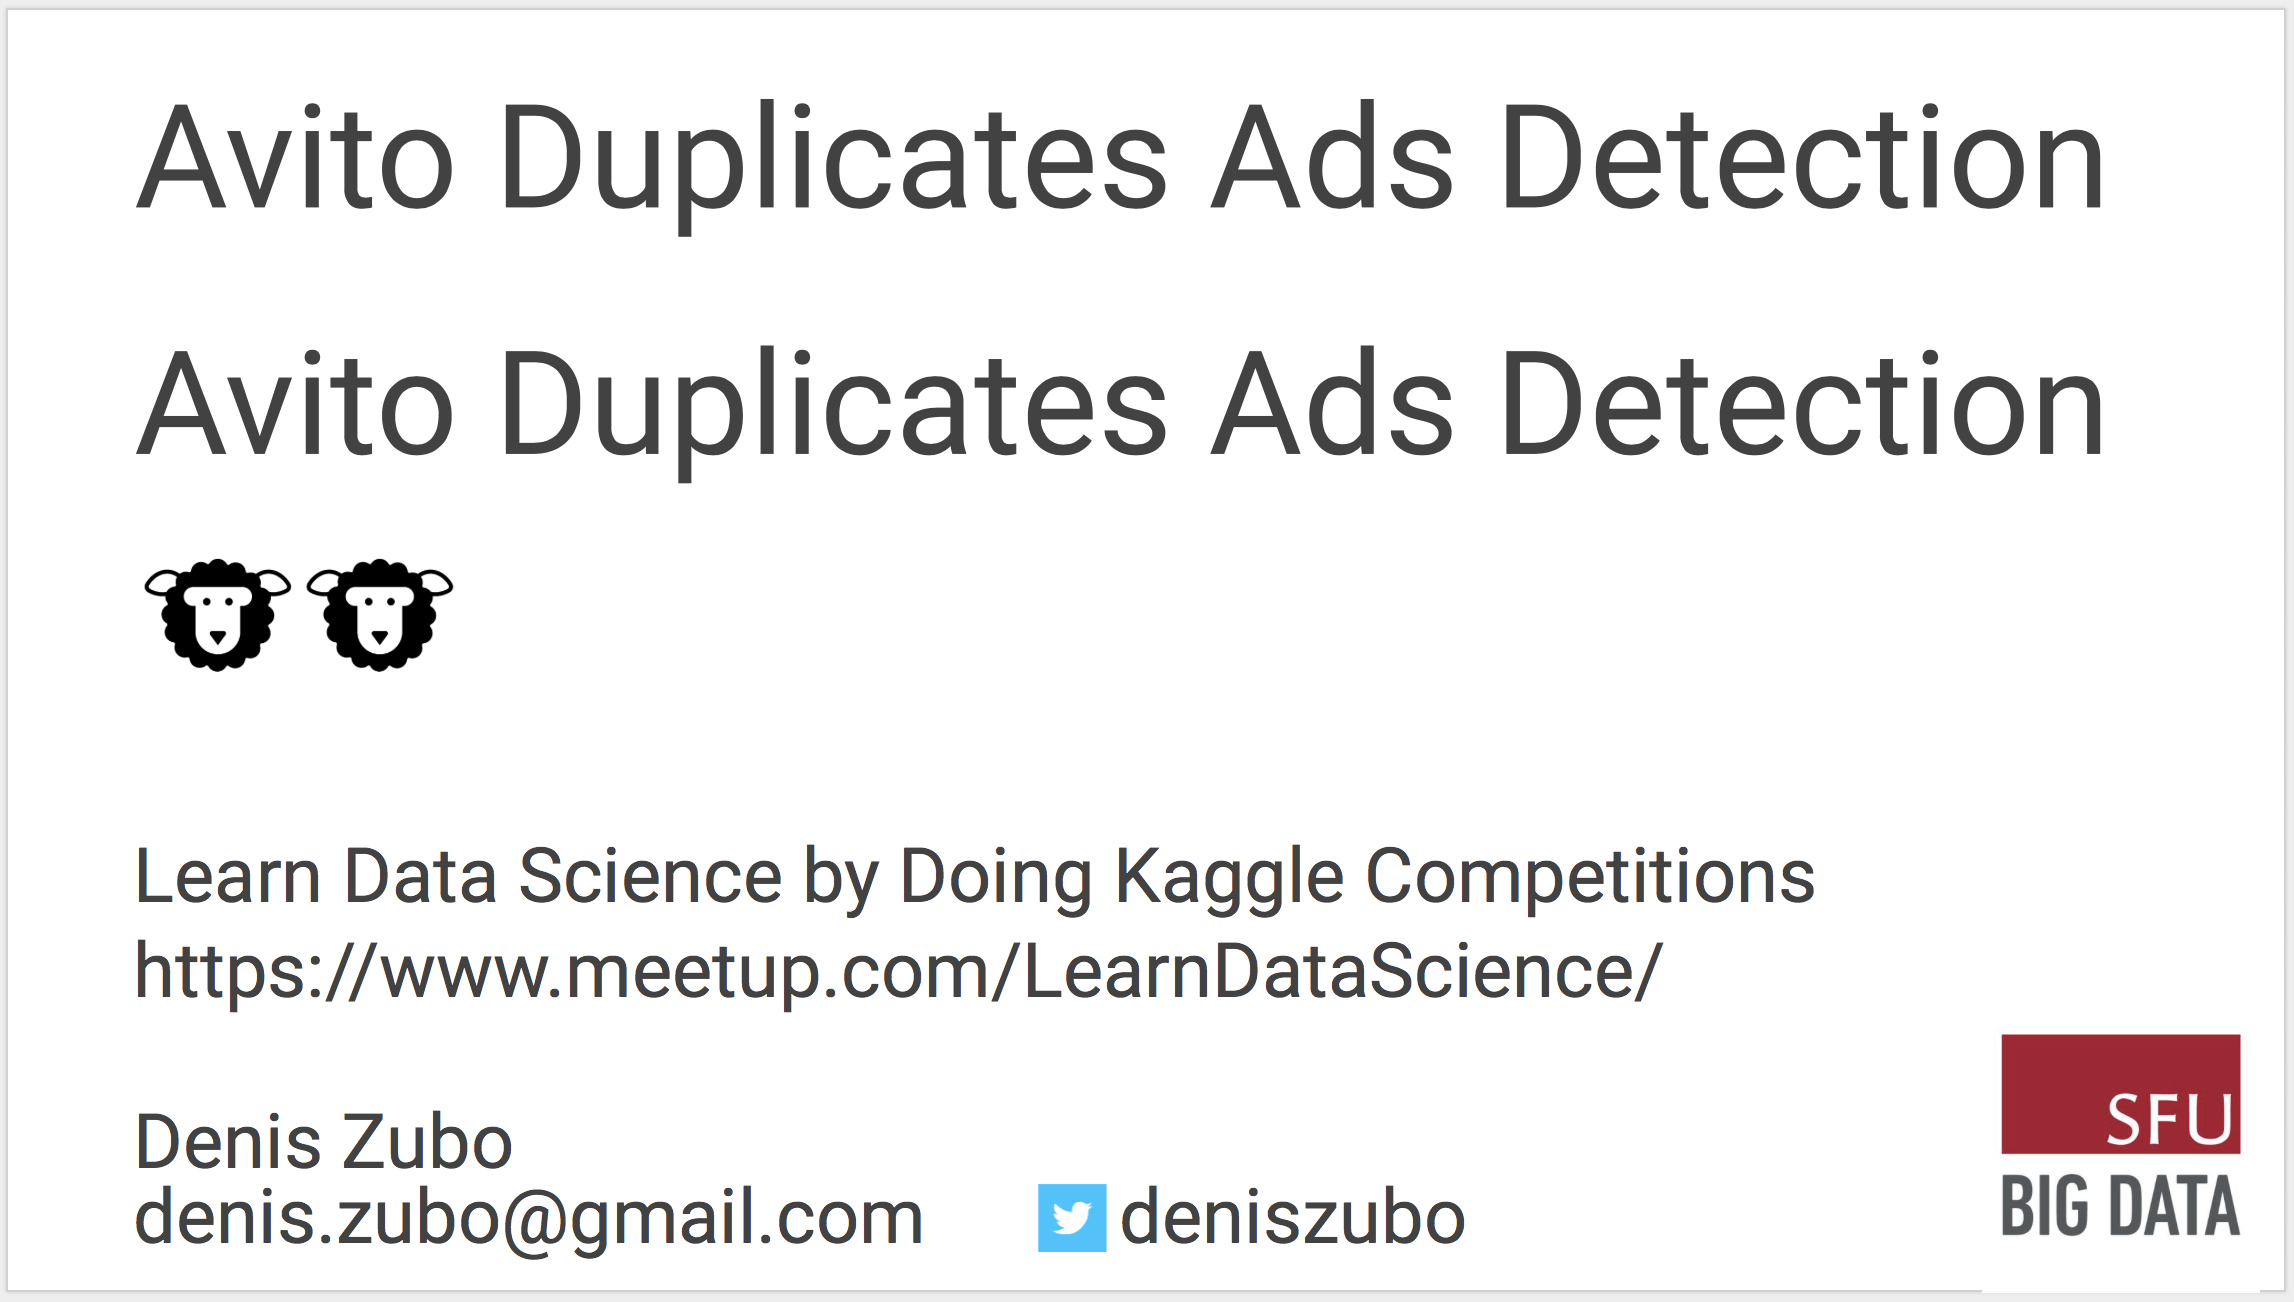 Avito Detect Duplicate Ads Kaggle competition presentation by Denis Zubo